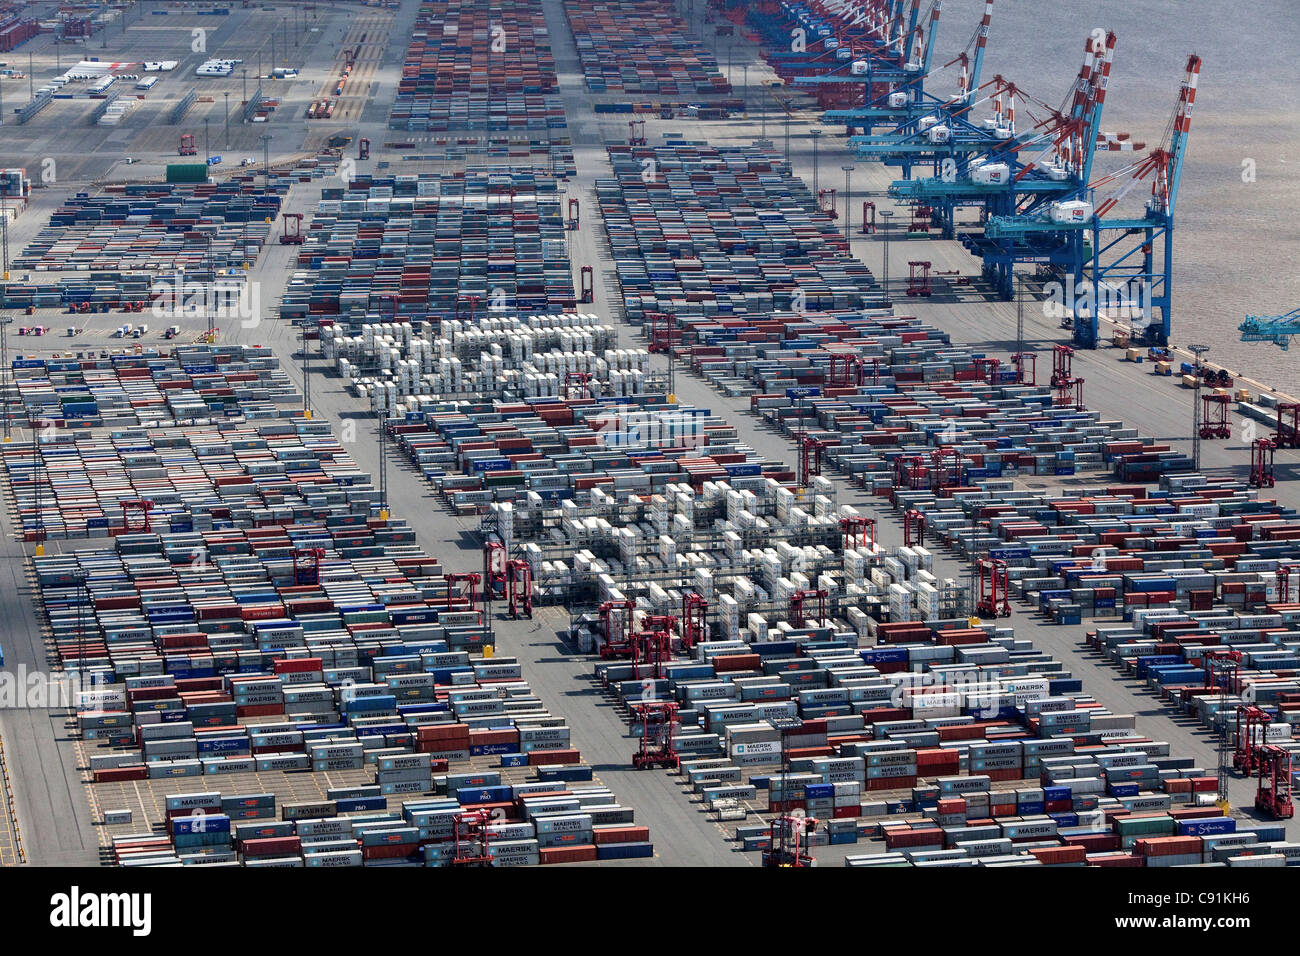 Aerial view of a container port terminal with rows of containers, Bremerhaven, Bremen, Germany Stock Photo